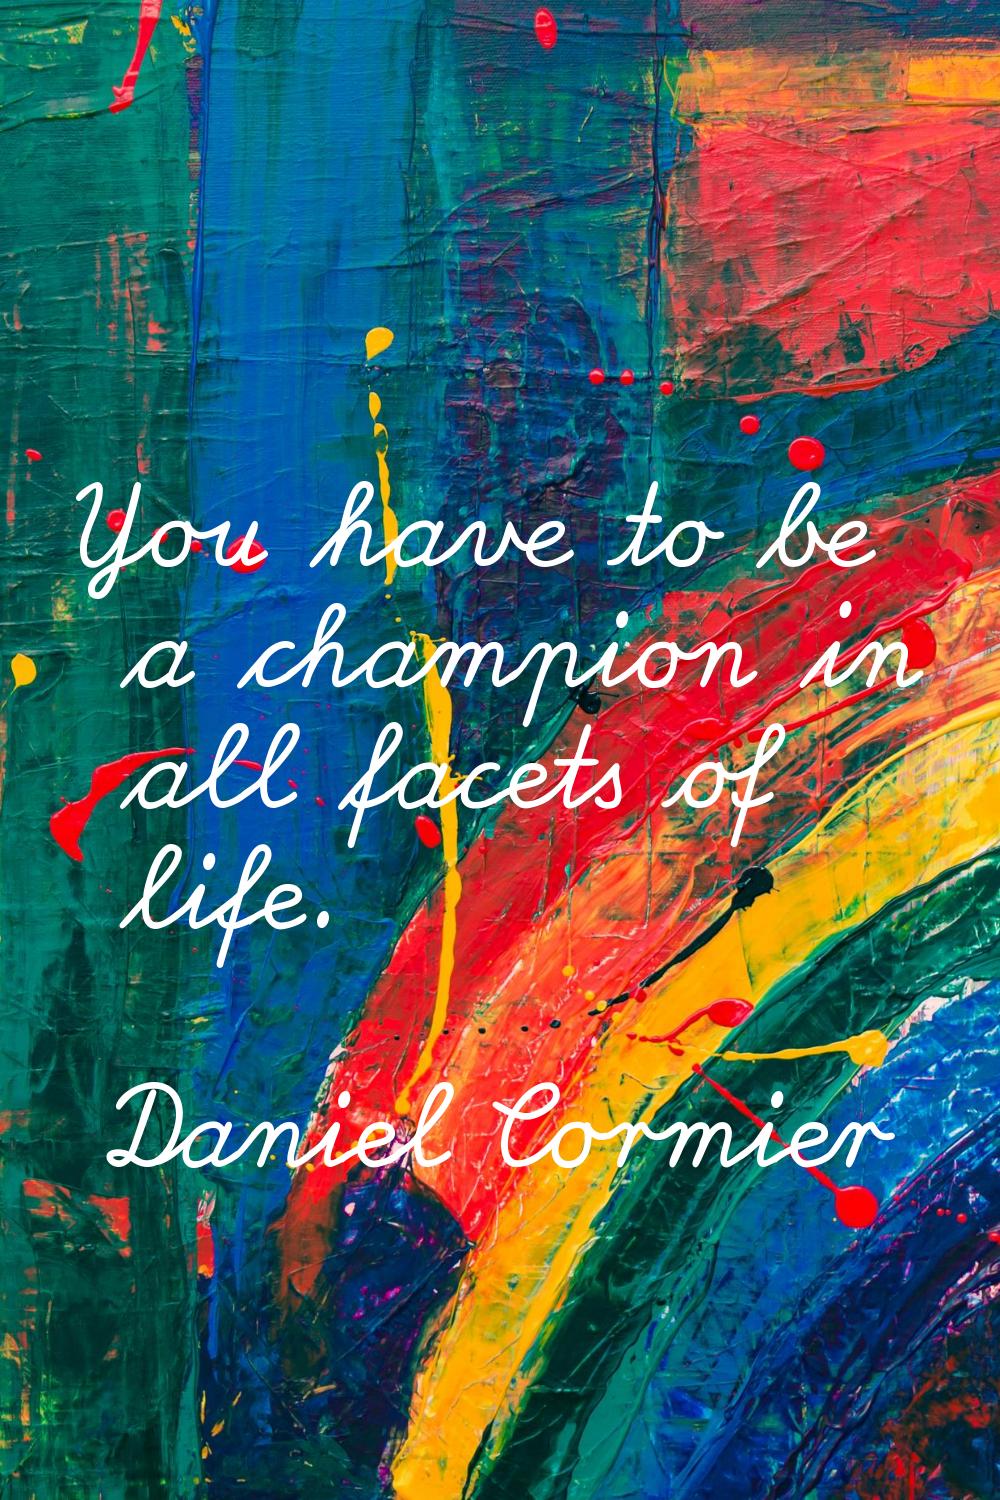 You have to be a champion in all facets of life.